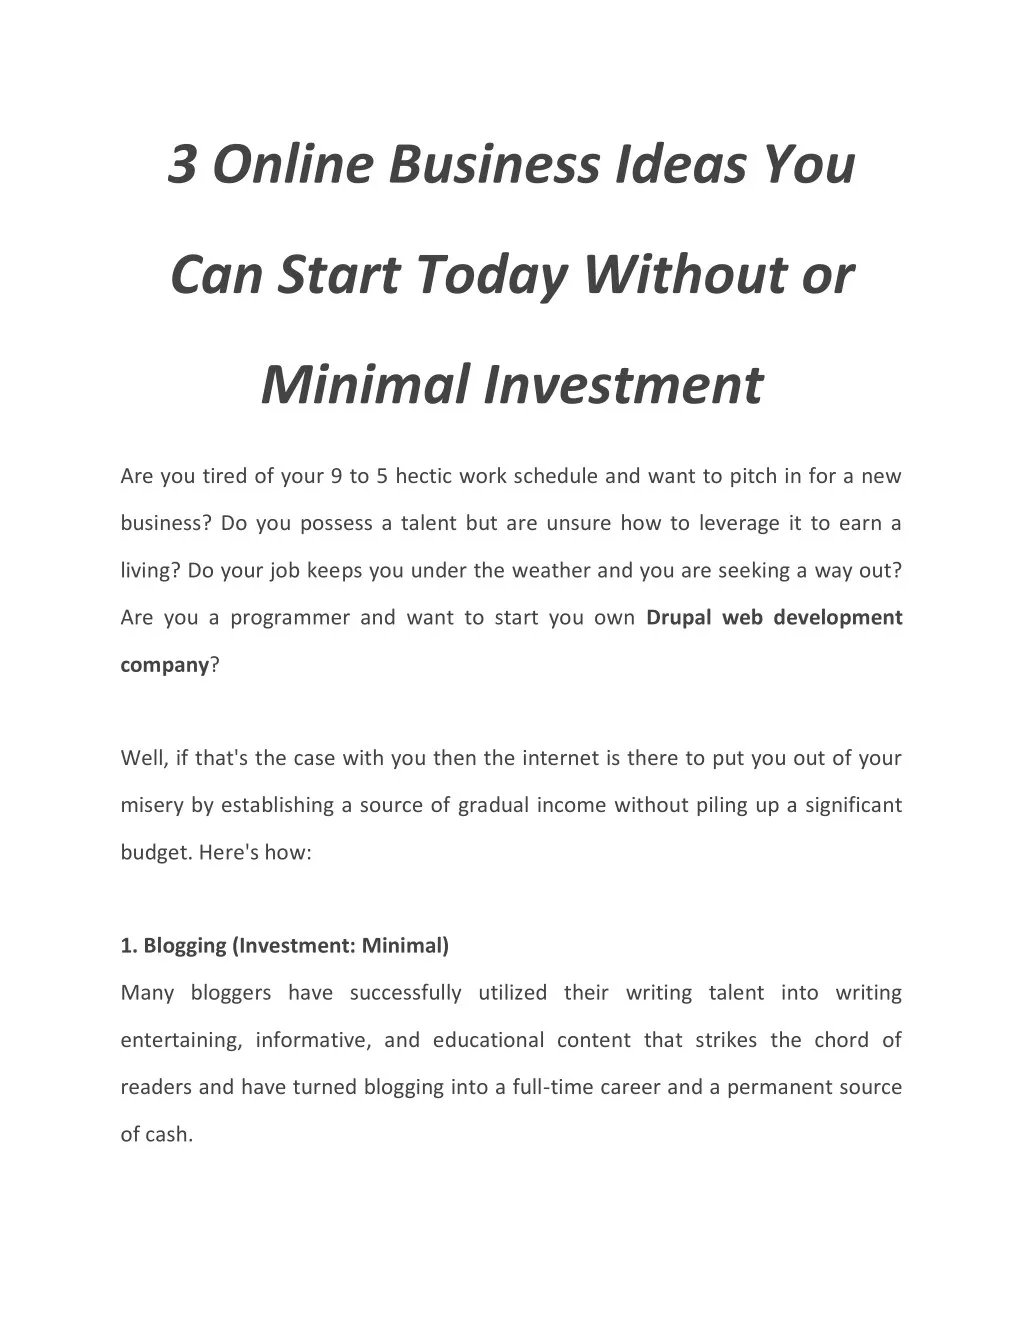 3 online business ideas you